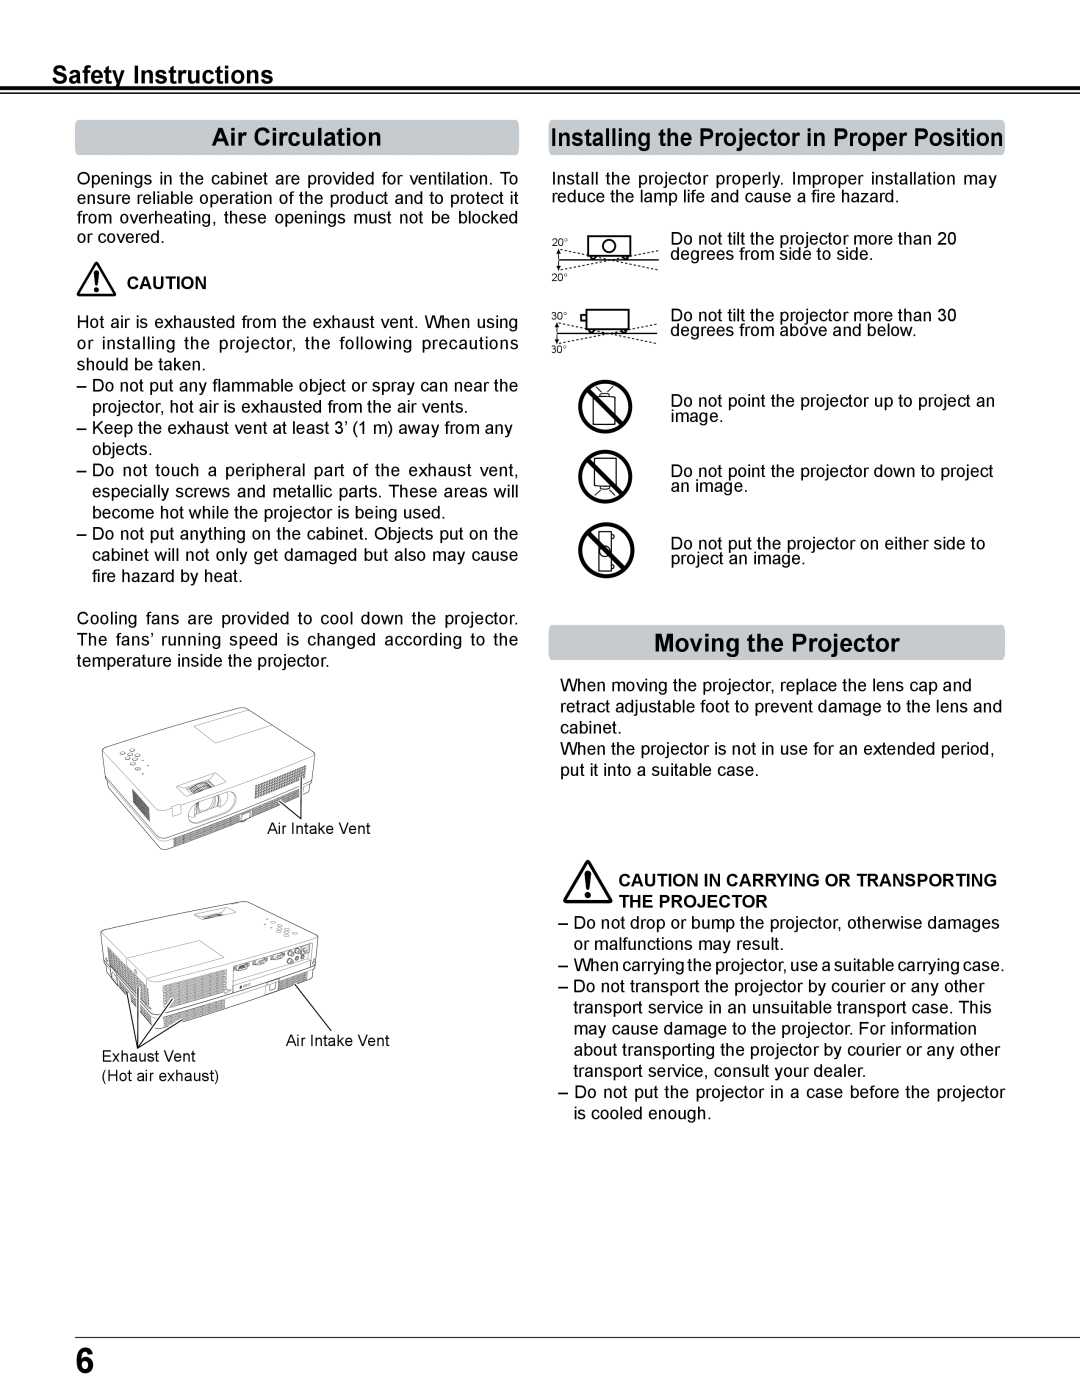 Sanyo PLC-XE34 Safety Instructions Air Circulation, Installing the Projector in Proper Position, Moving the Projector 